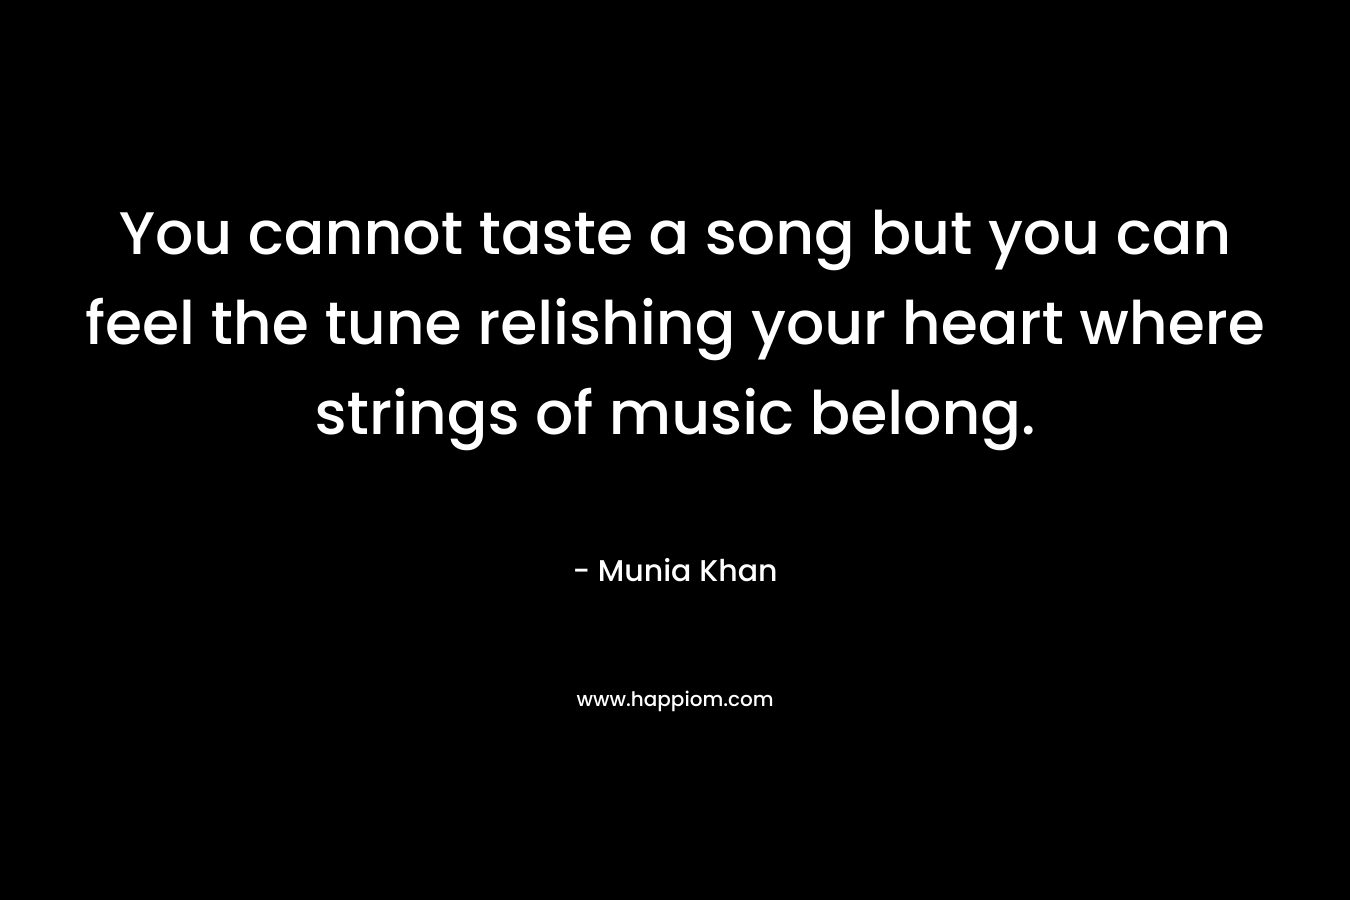 You cannot taste a song but you can feel the tune relishing your heart where strings of music belong. – Munia Khan